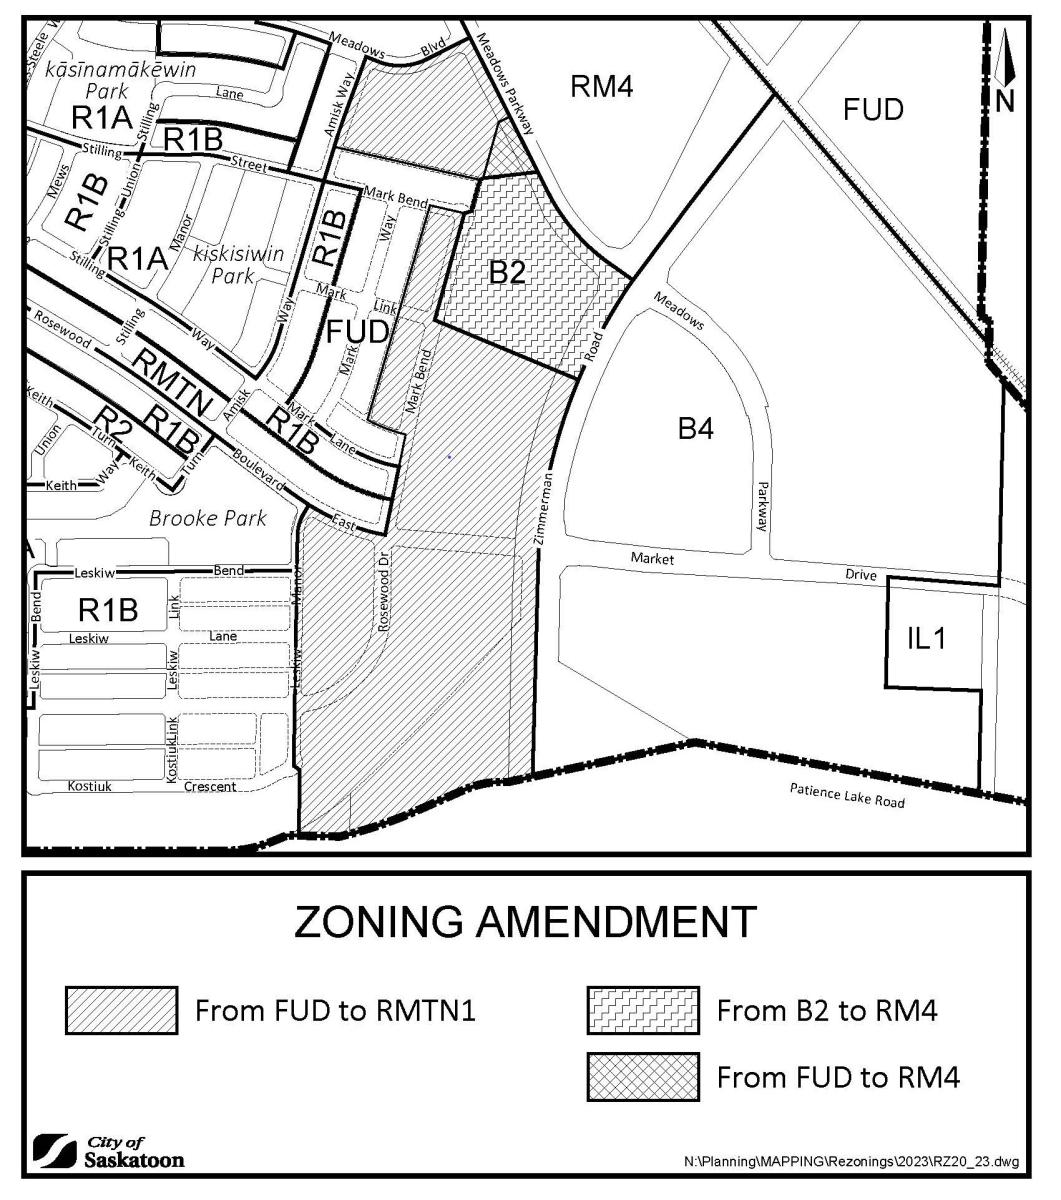 Z20_23 Proposed Zoning Amendment